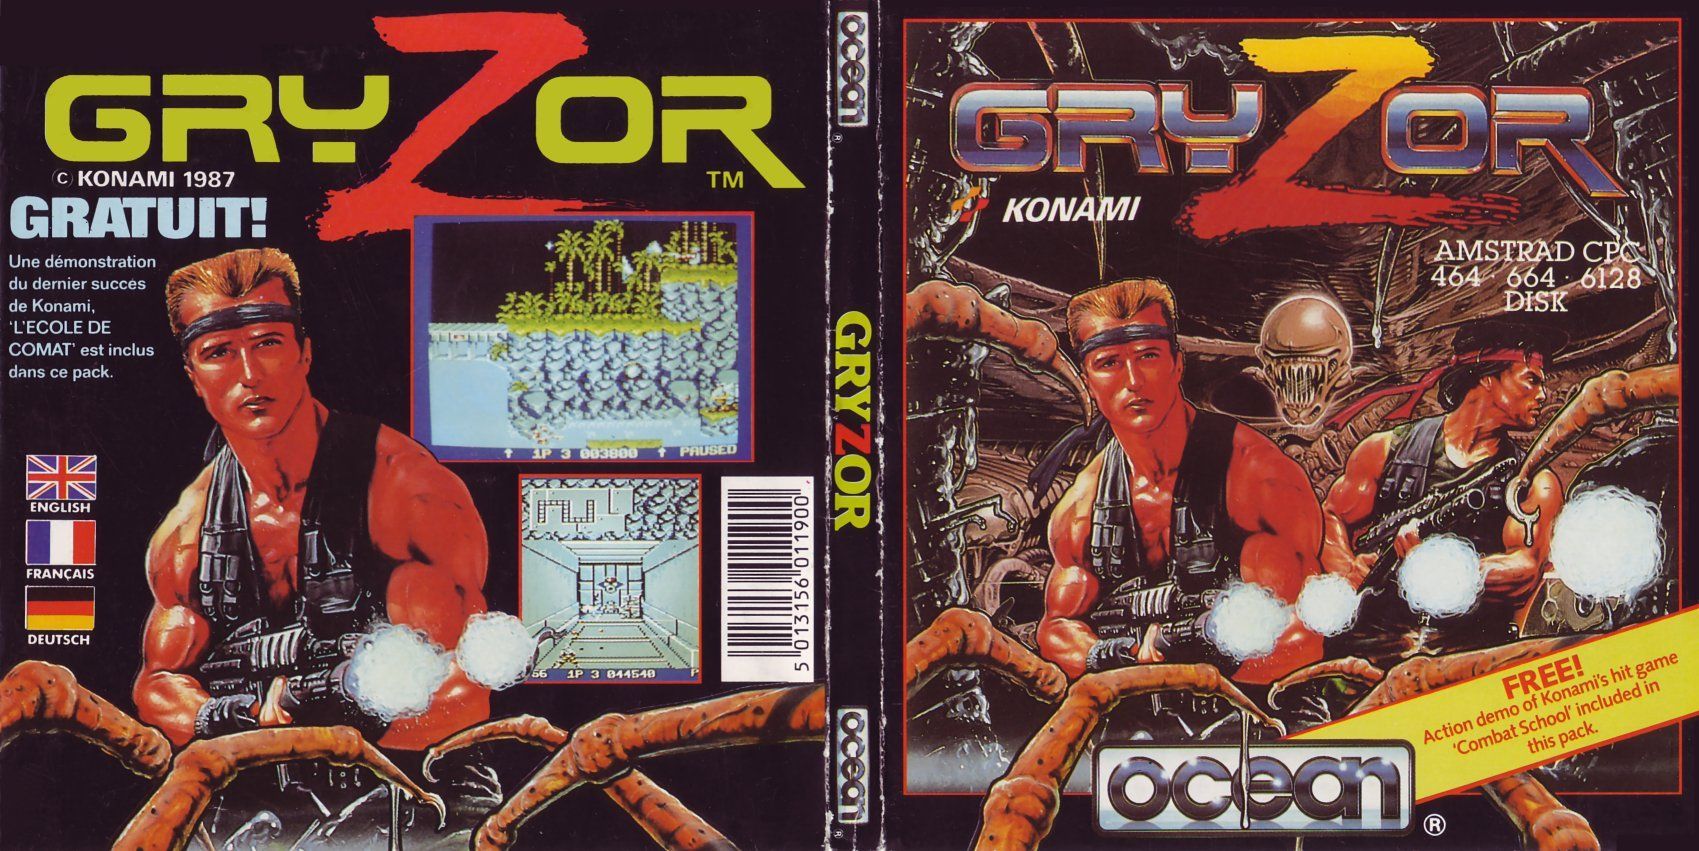 cover of the Amstrad CPC game gryzor by Mig